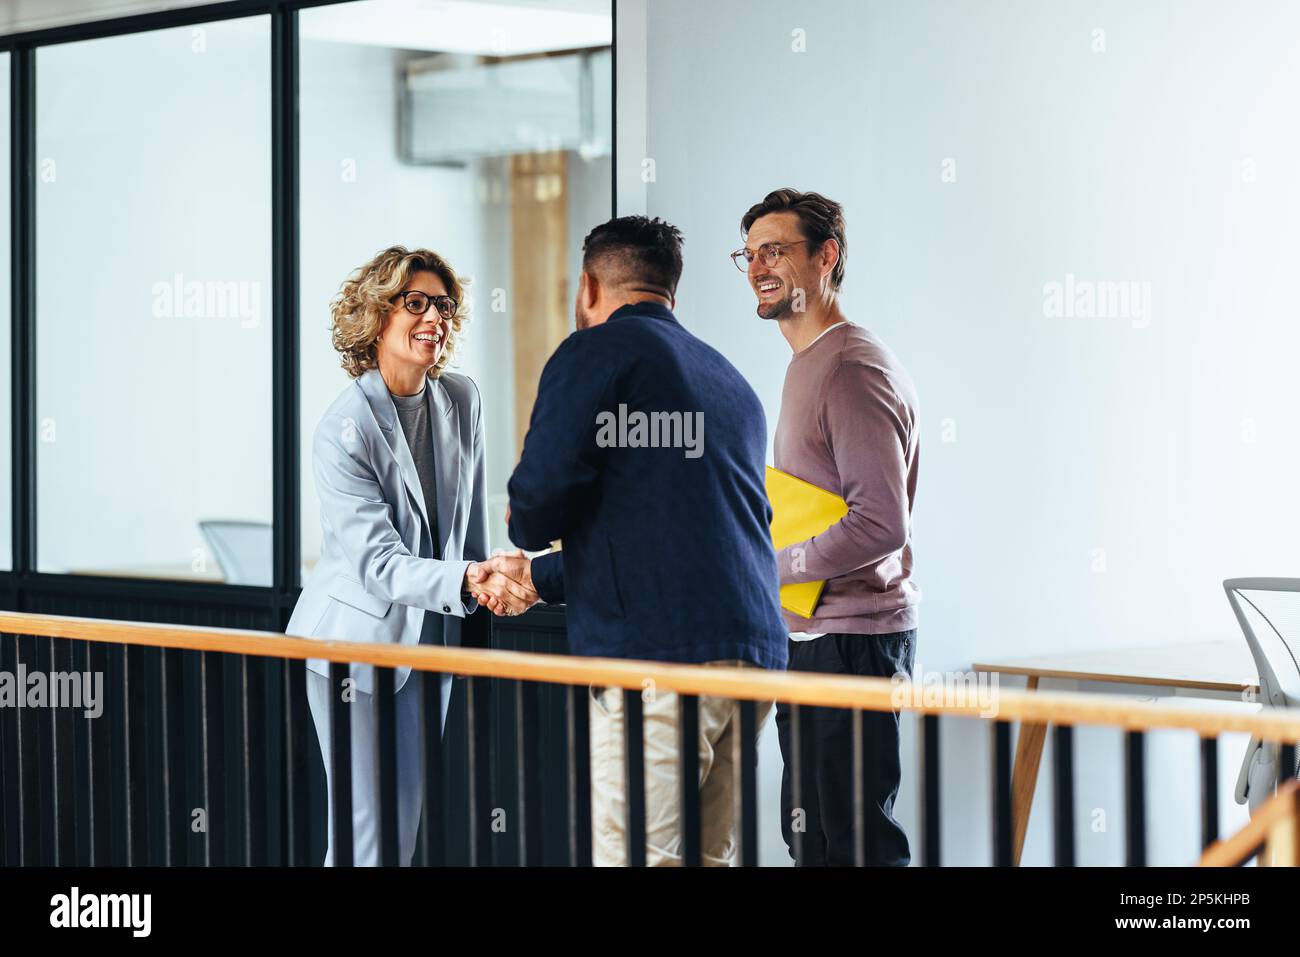 Successful business woman shaking hands with a new client in an office. Professional woman meeting with a potential business partner. Partnership in a Stock Photo